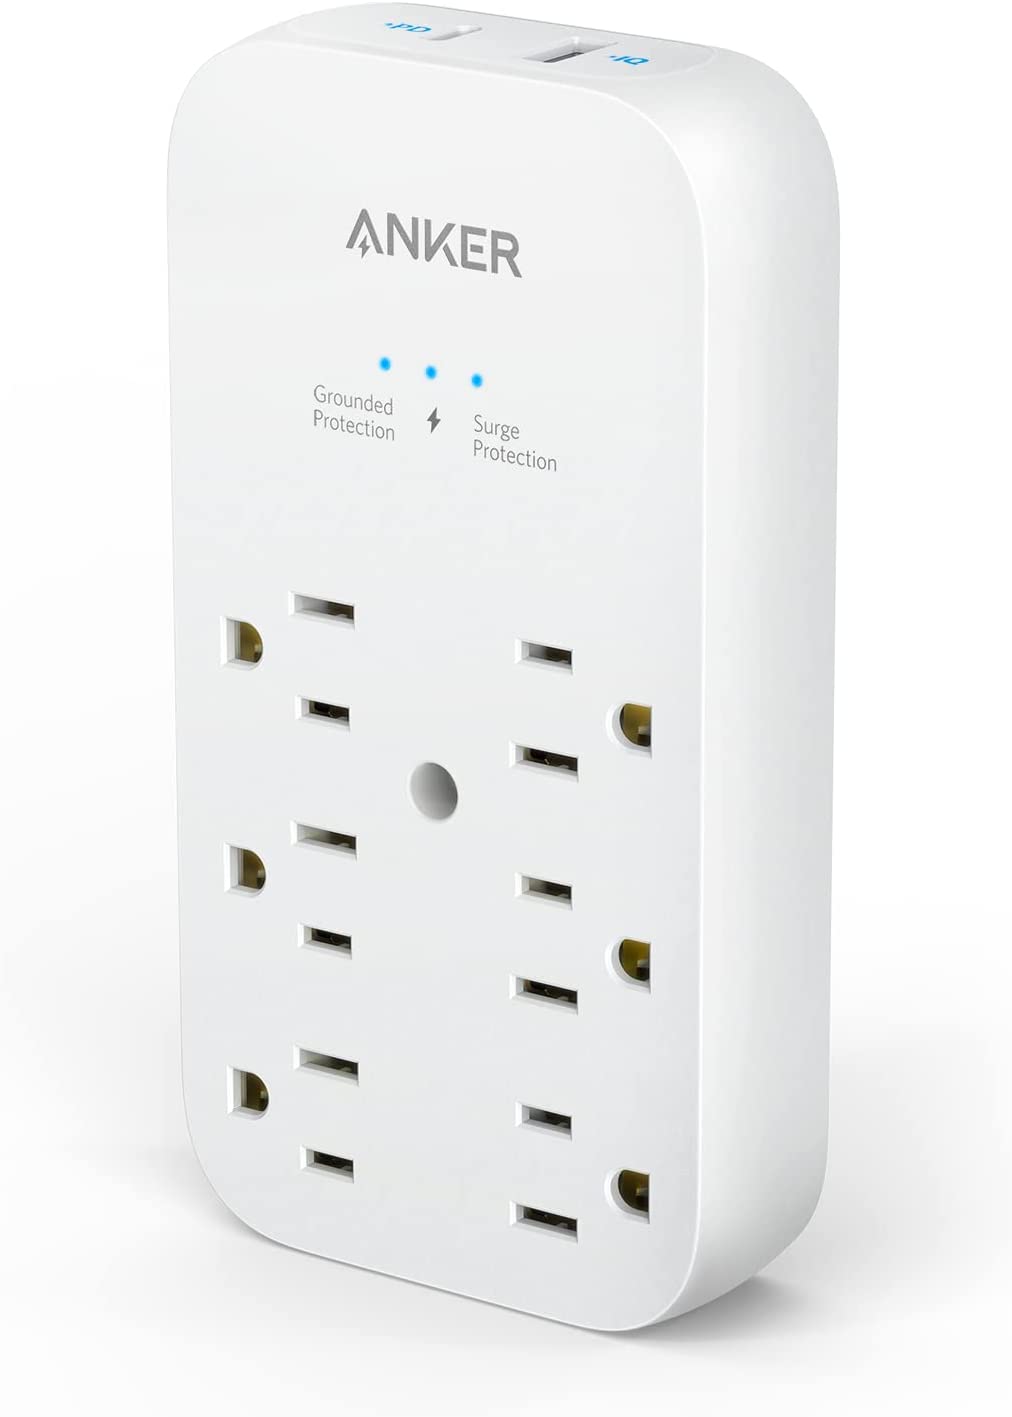 Save up to 24% OFF: Anker 6 Outlets and 2 USB Ports Outlet Extender +FS $18.99